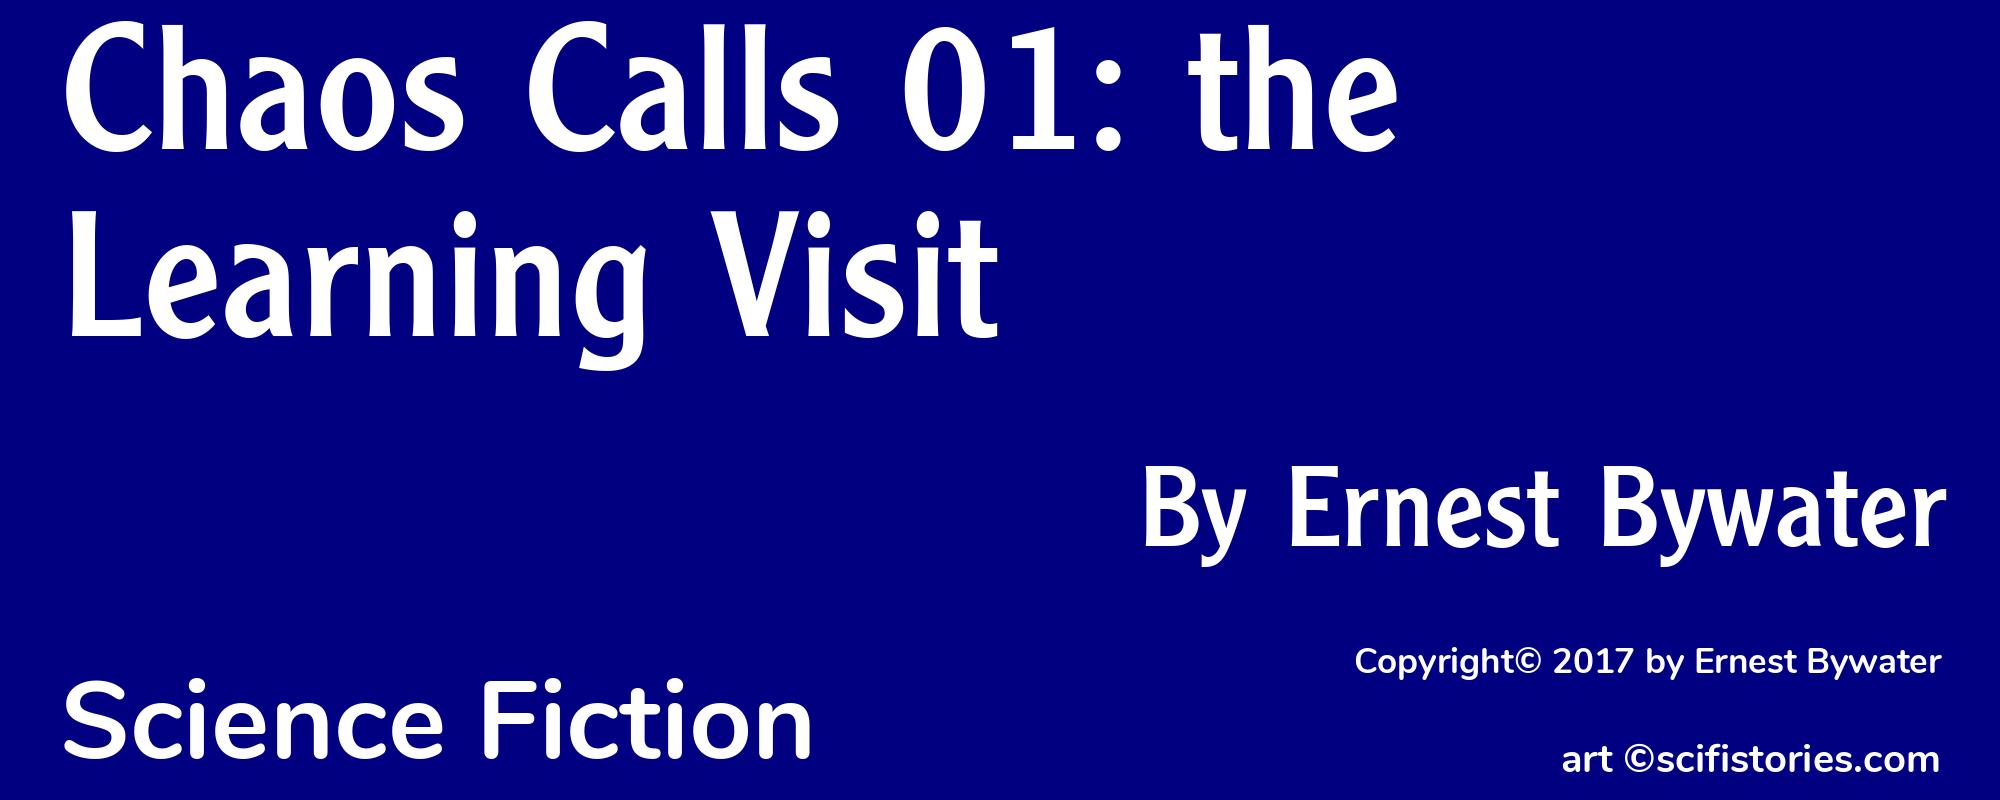 Chaos Calls 01: the Learning Visit - Cover